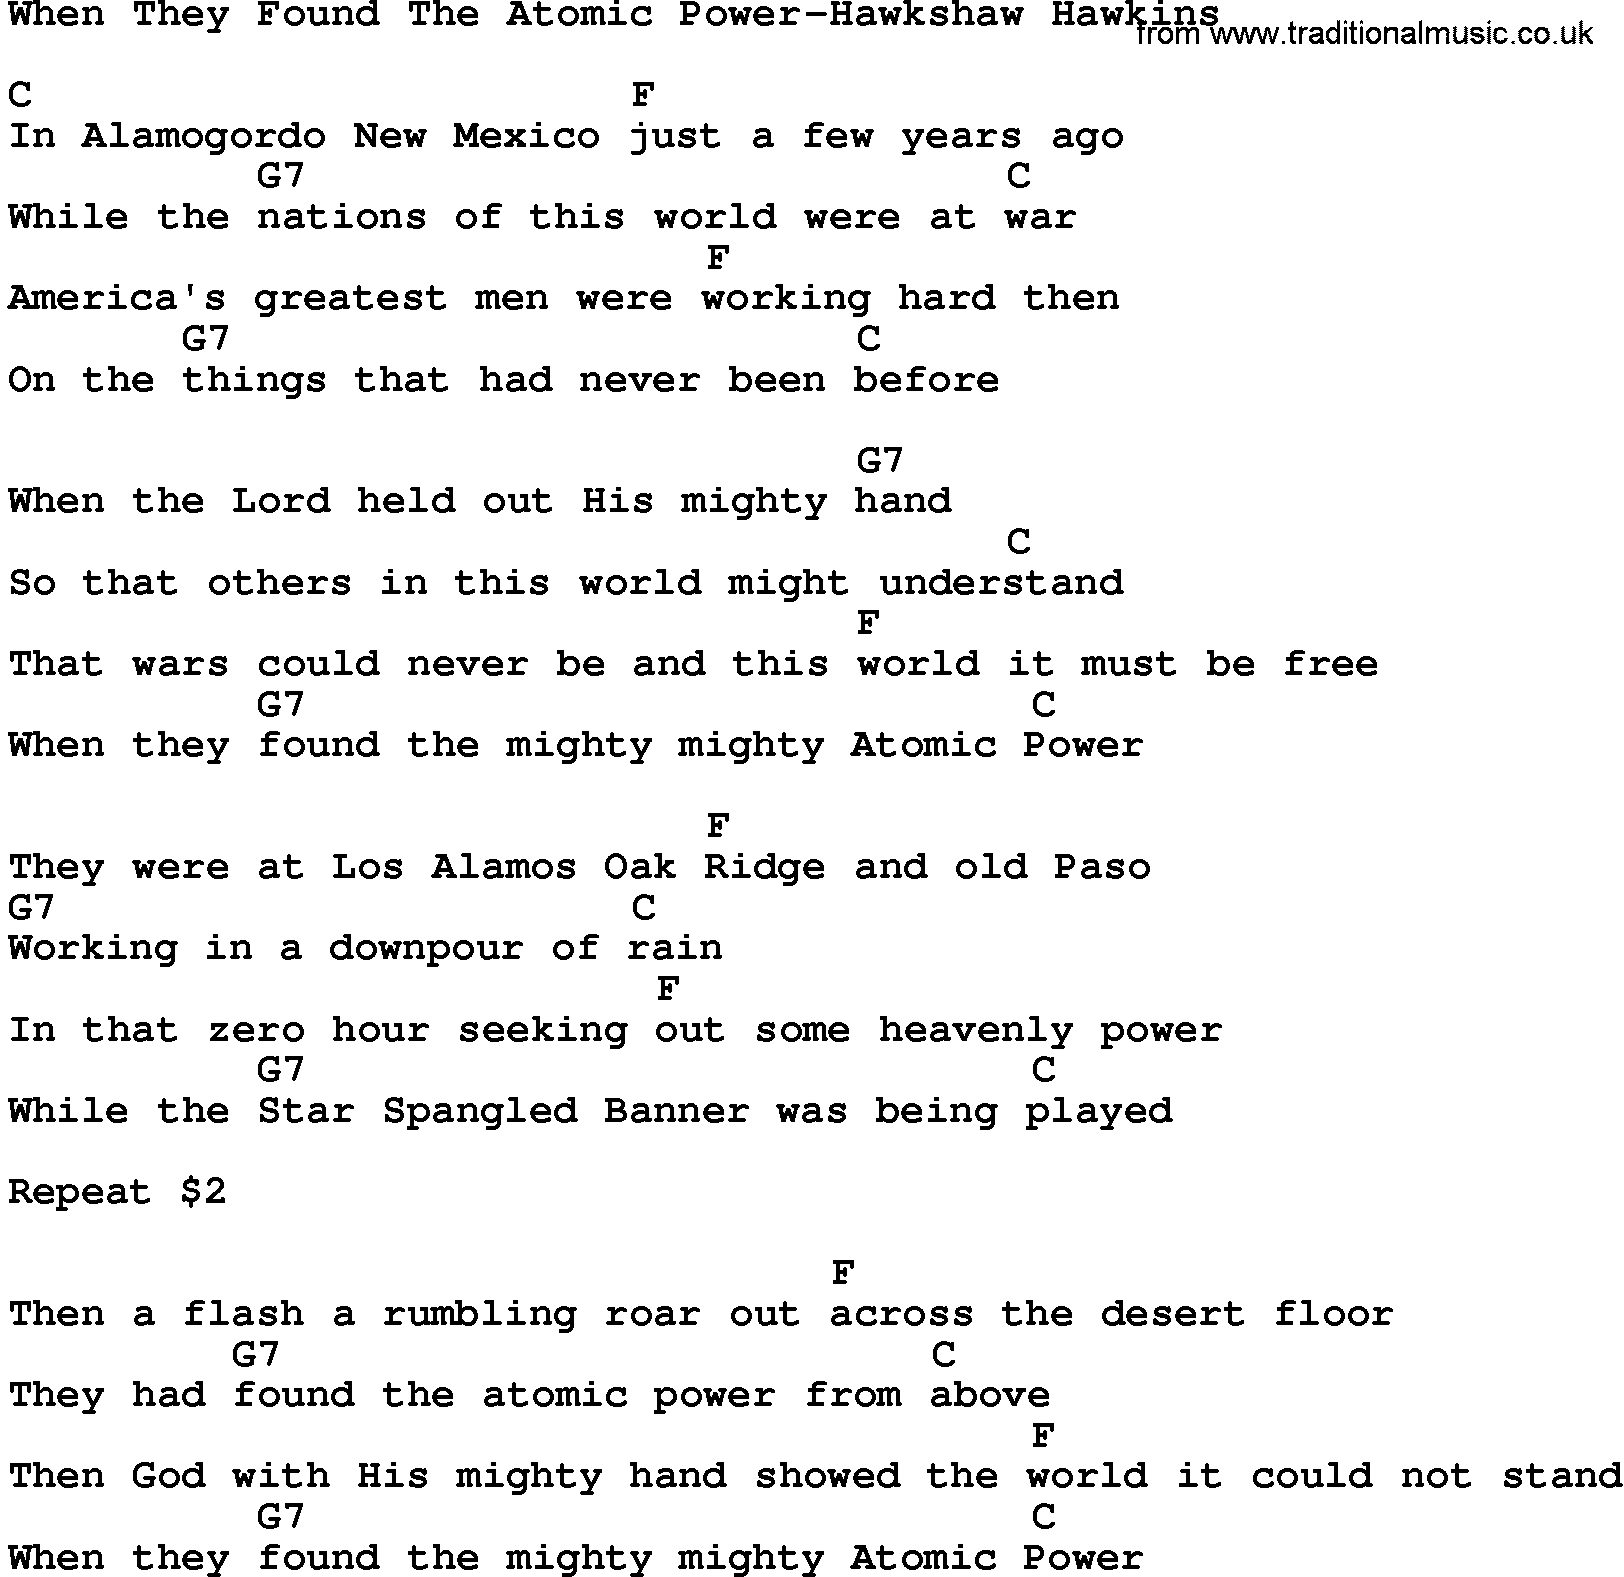 Country music song: When They Found The Atomic Power-Hawkshaw Hawkins lyrics and chords